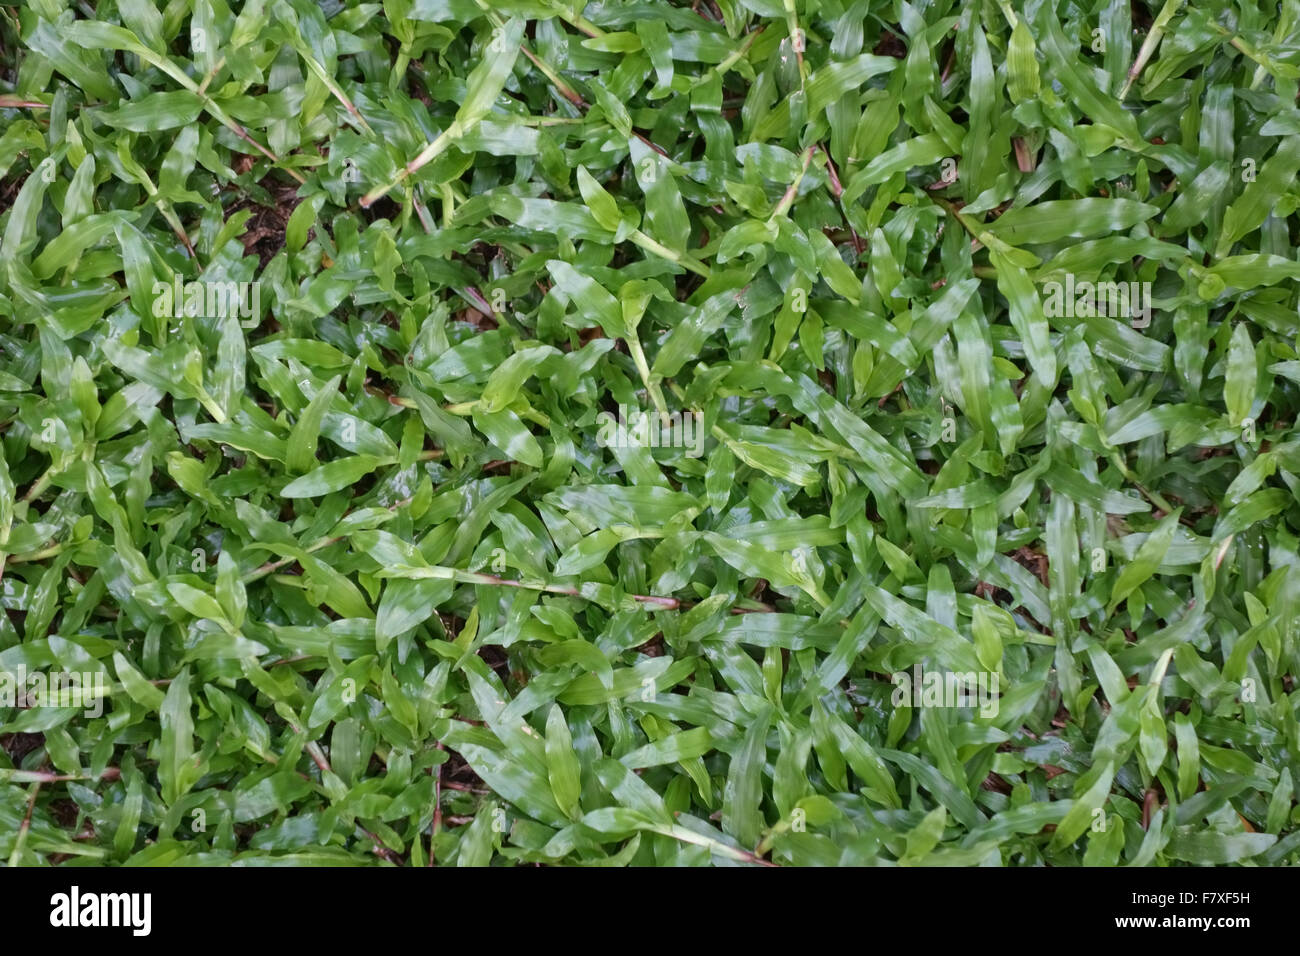 Blanket grass, Axonopus compressus, prostrate plants in lawn, Bangkok, Thailand, February Stock Photo